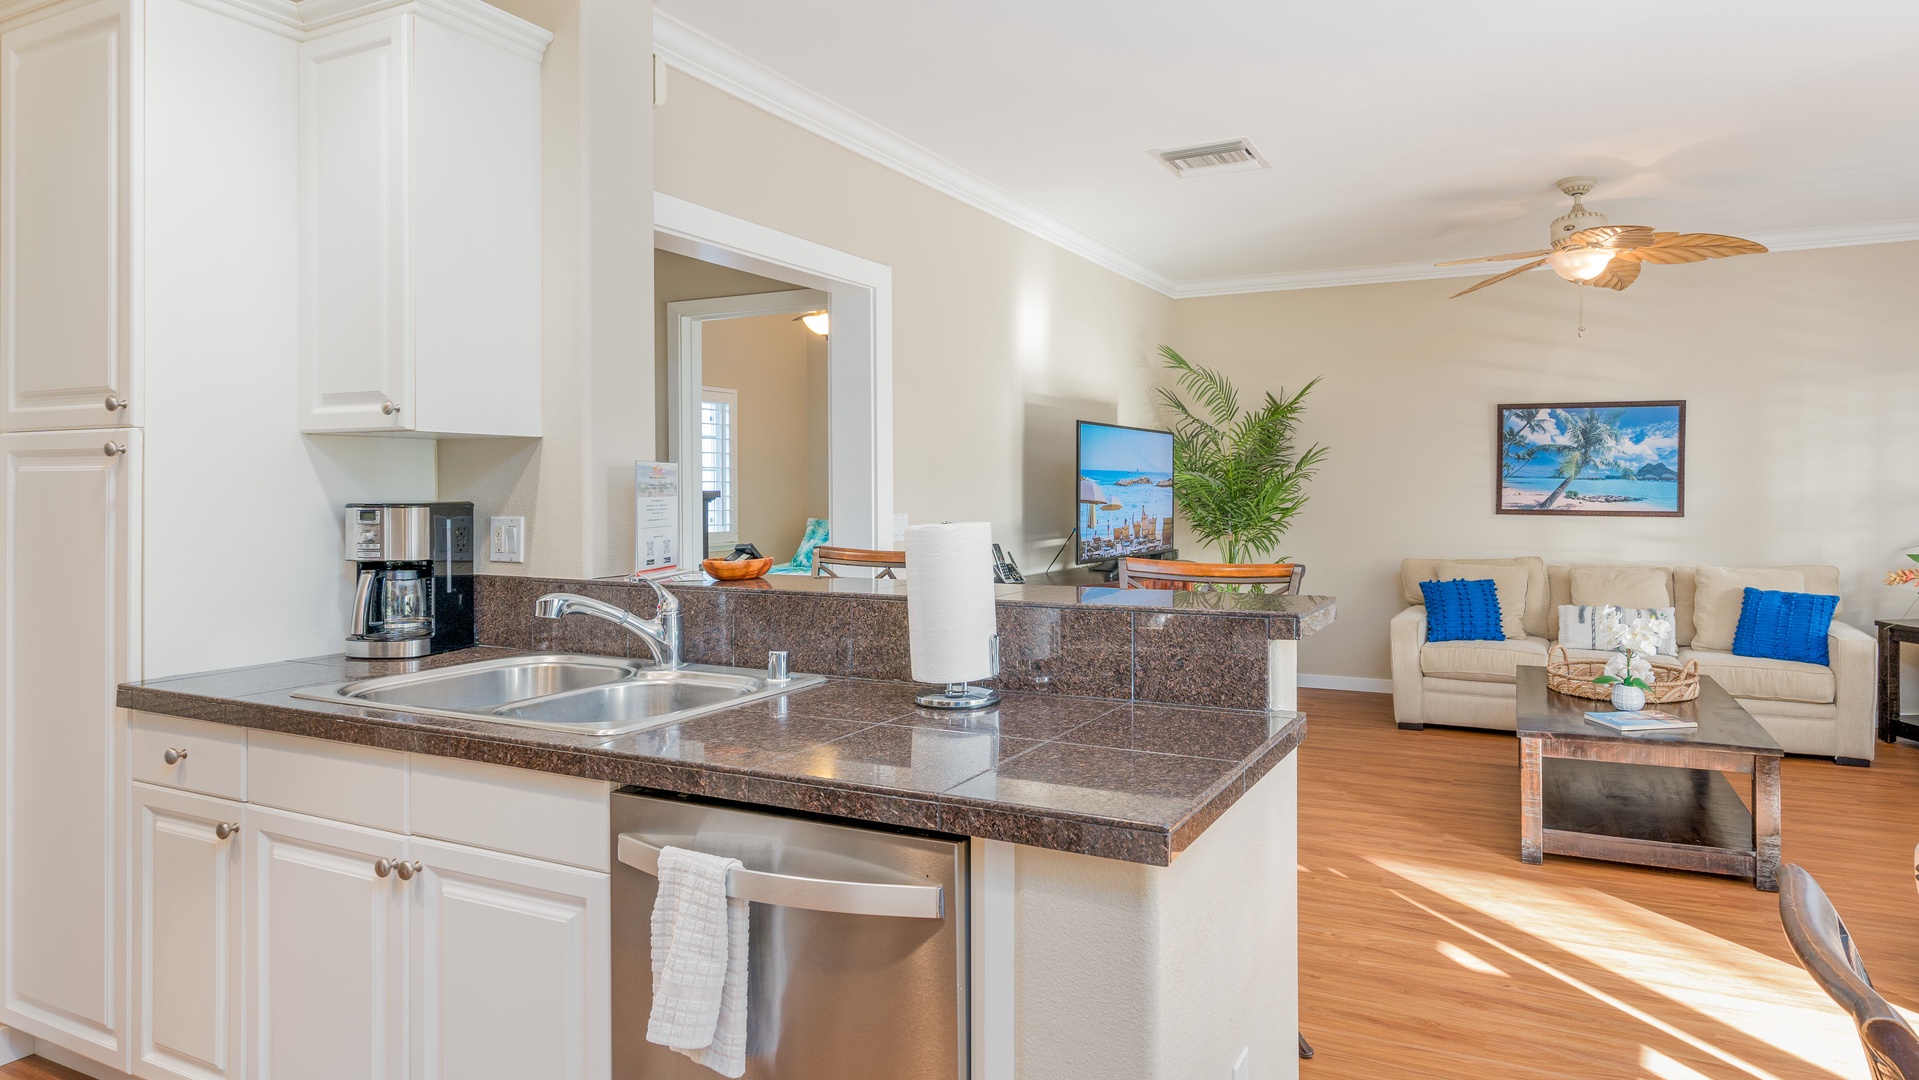 Kapolei Vacation Rentals, Coconut Plantation 1194-3 - The beautiful kitchen has bar seating and an open floor plan for entertaining.